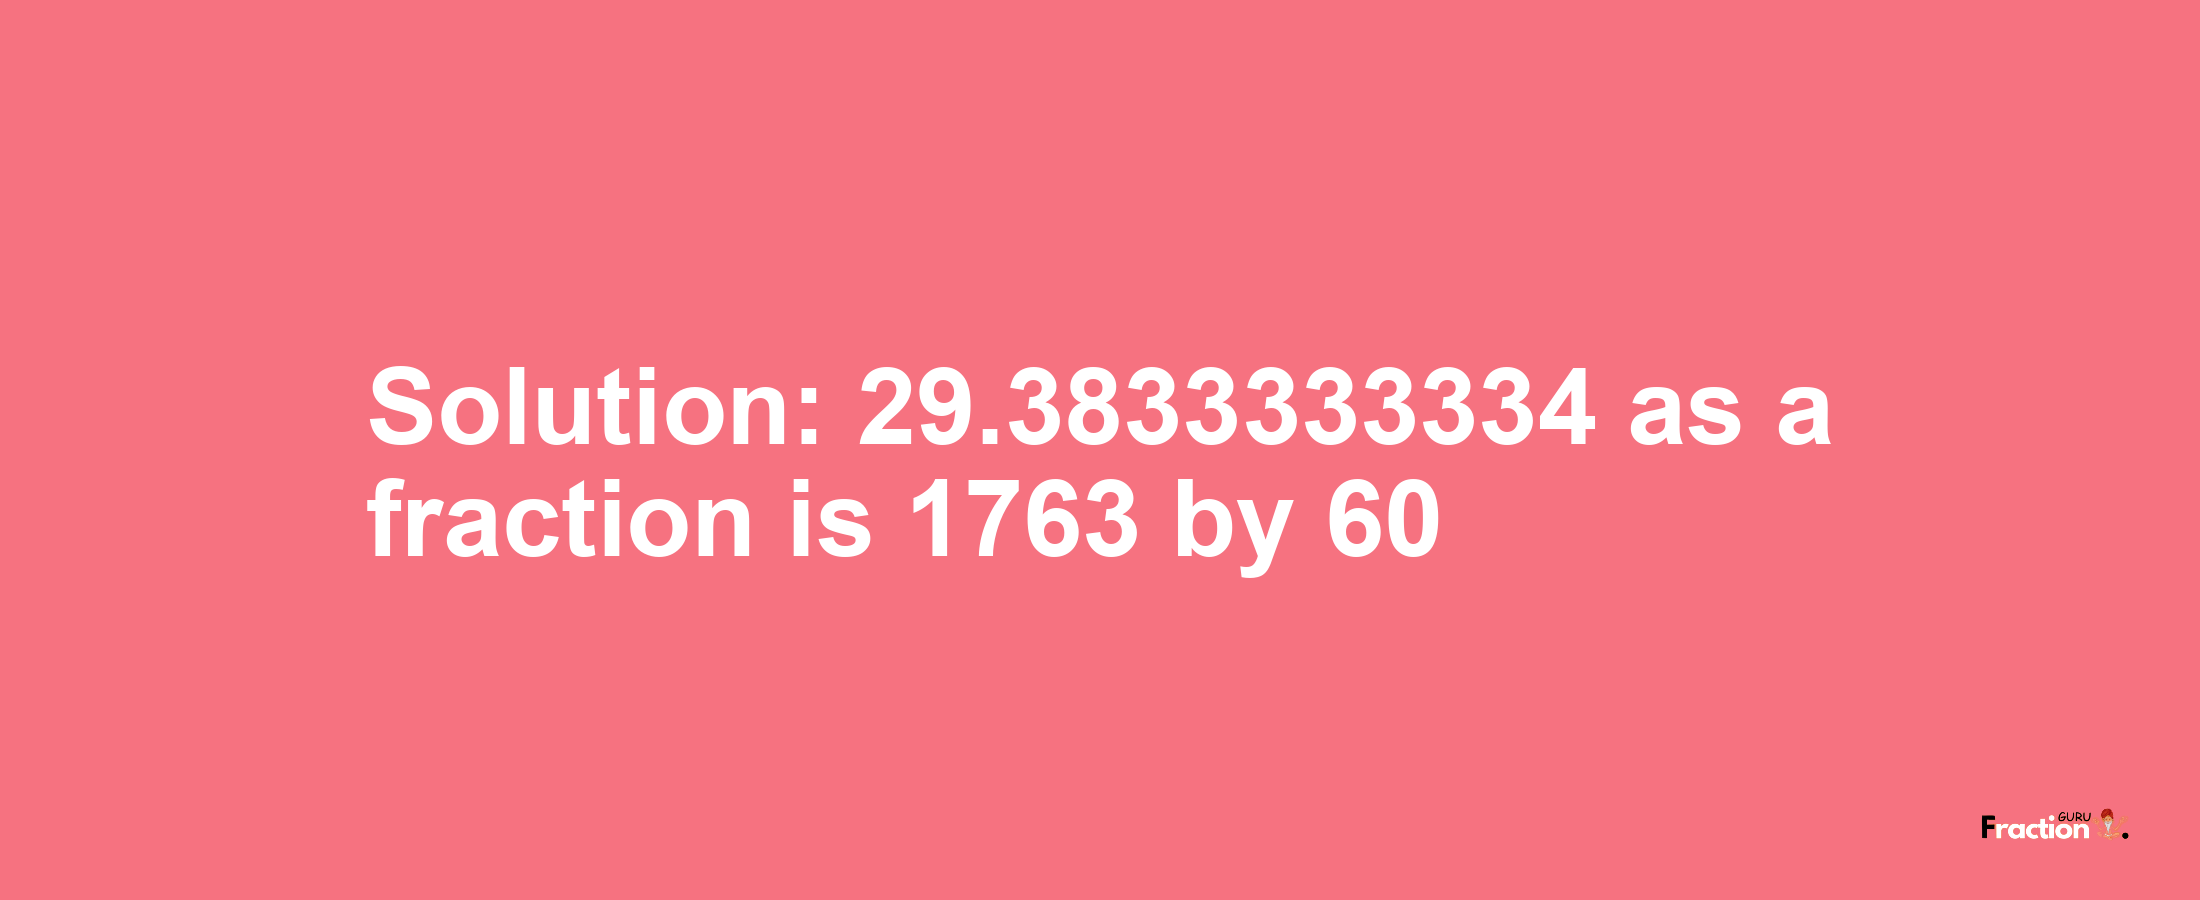 Solution:29.3833333334 as a fraction is 1763/60